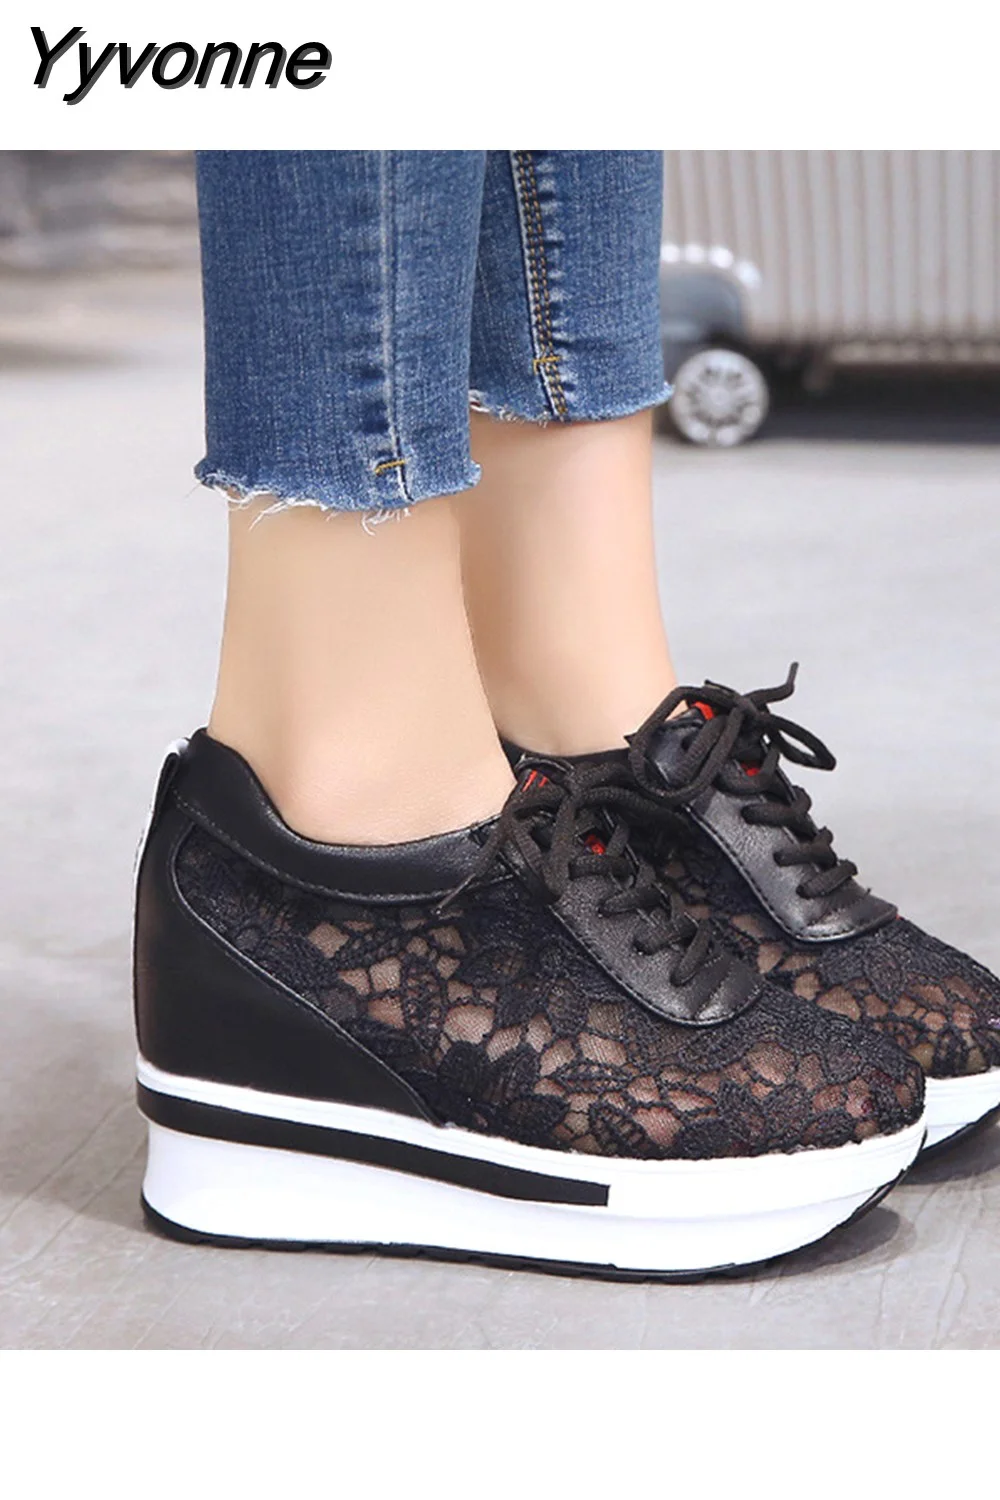 Yyvonne New Lace Breathable Sneakers Women Shoes Comfortable Casual Woman Platform Wedge Shoes